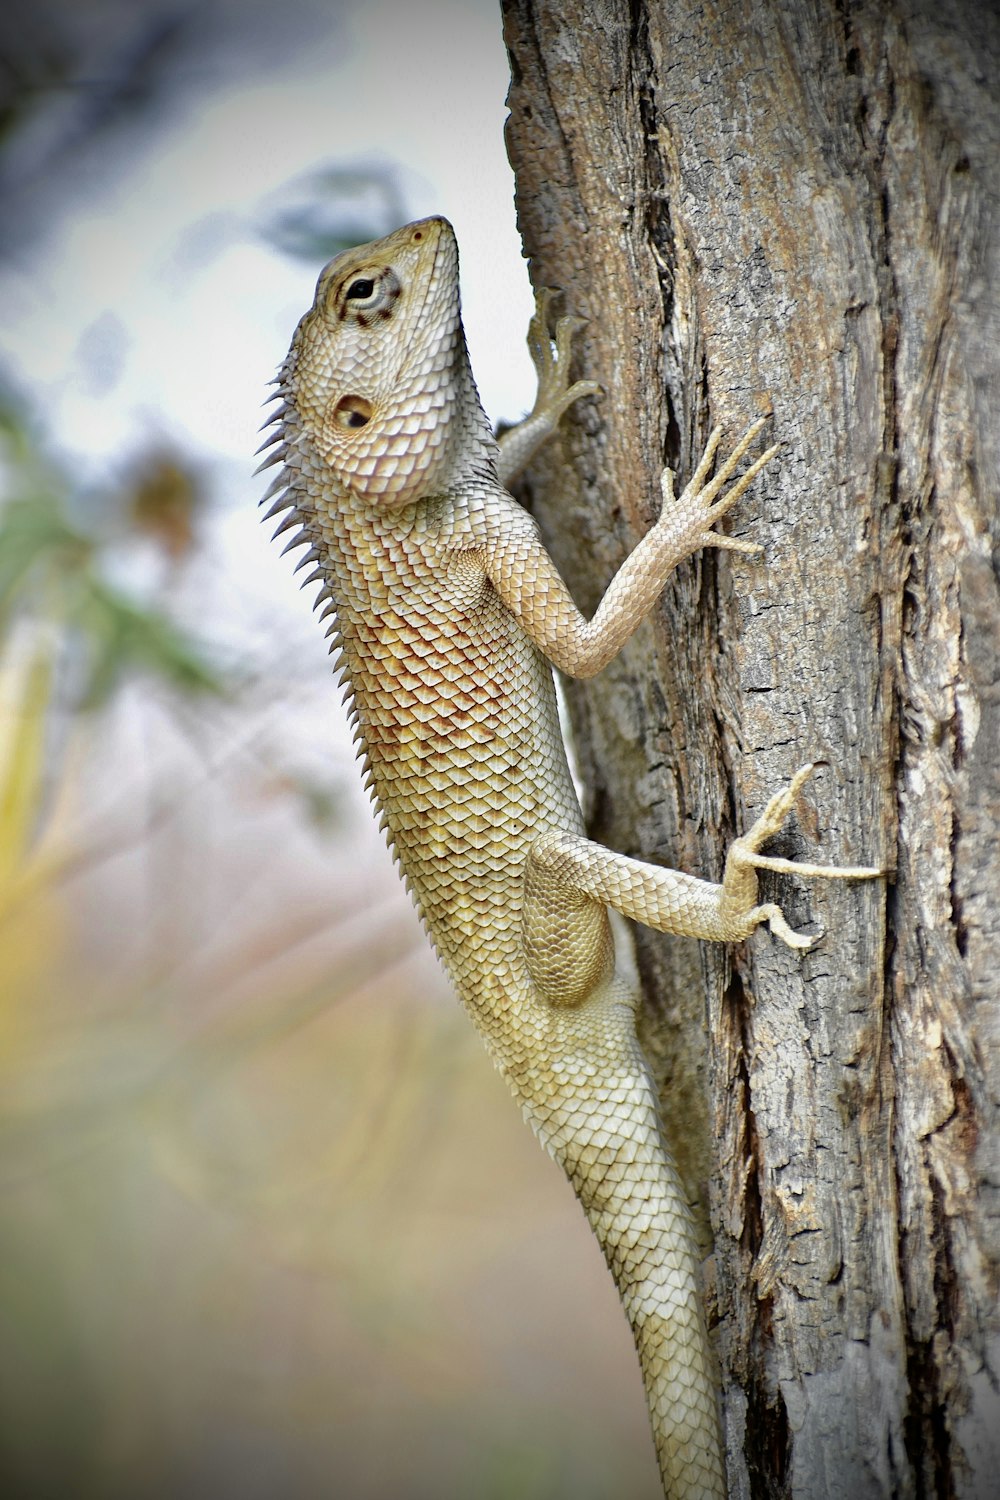 brown and white bearded dragon on brown tree trunk during daytime